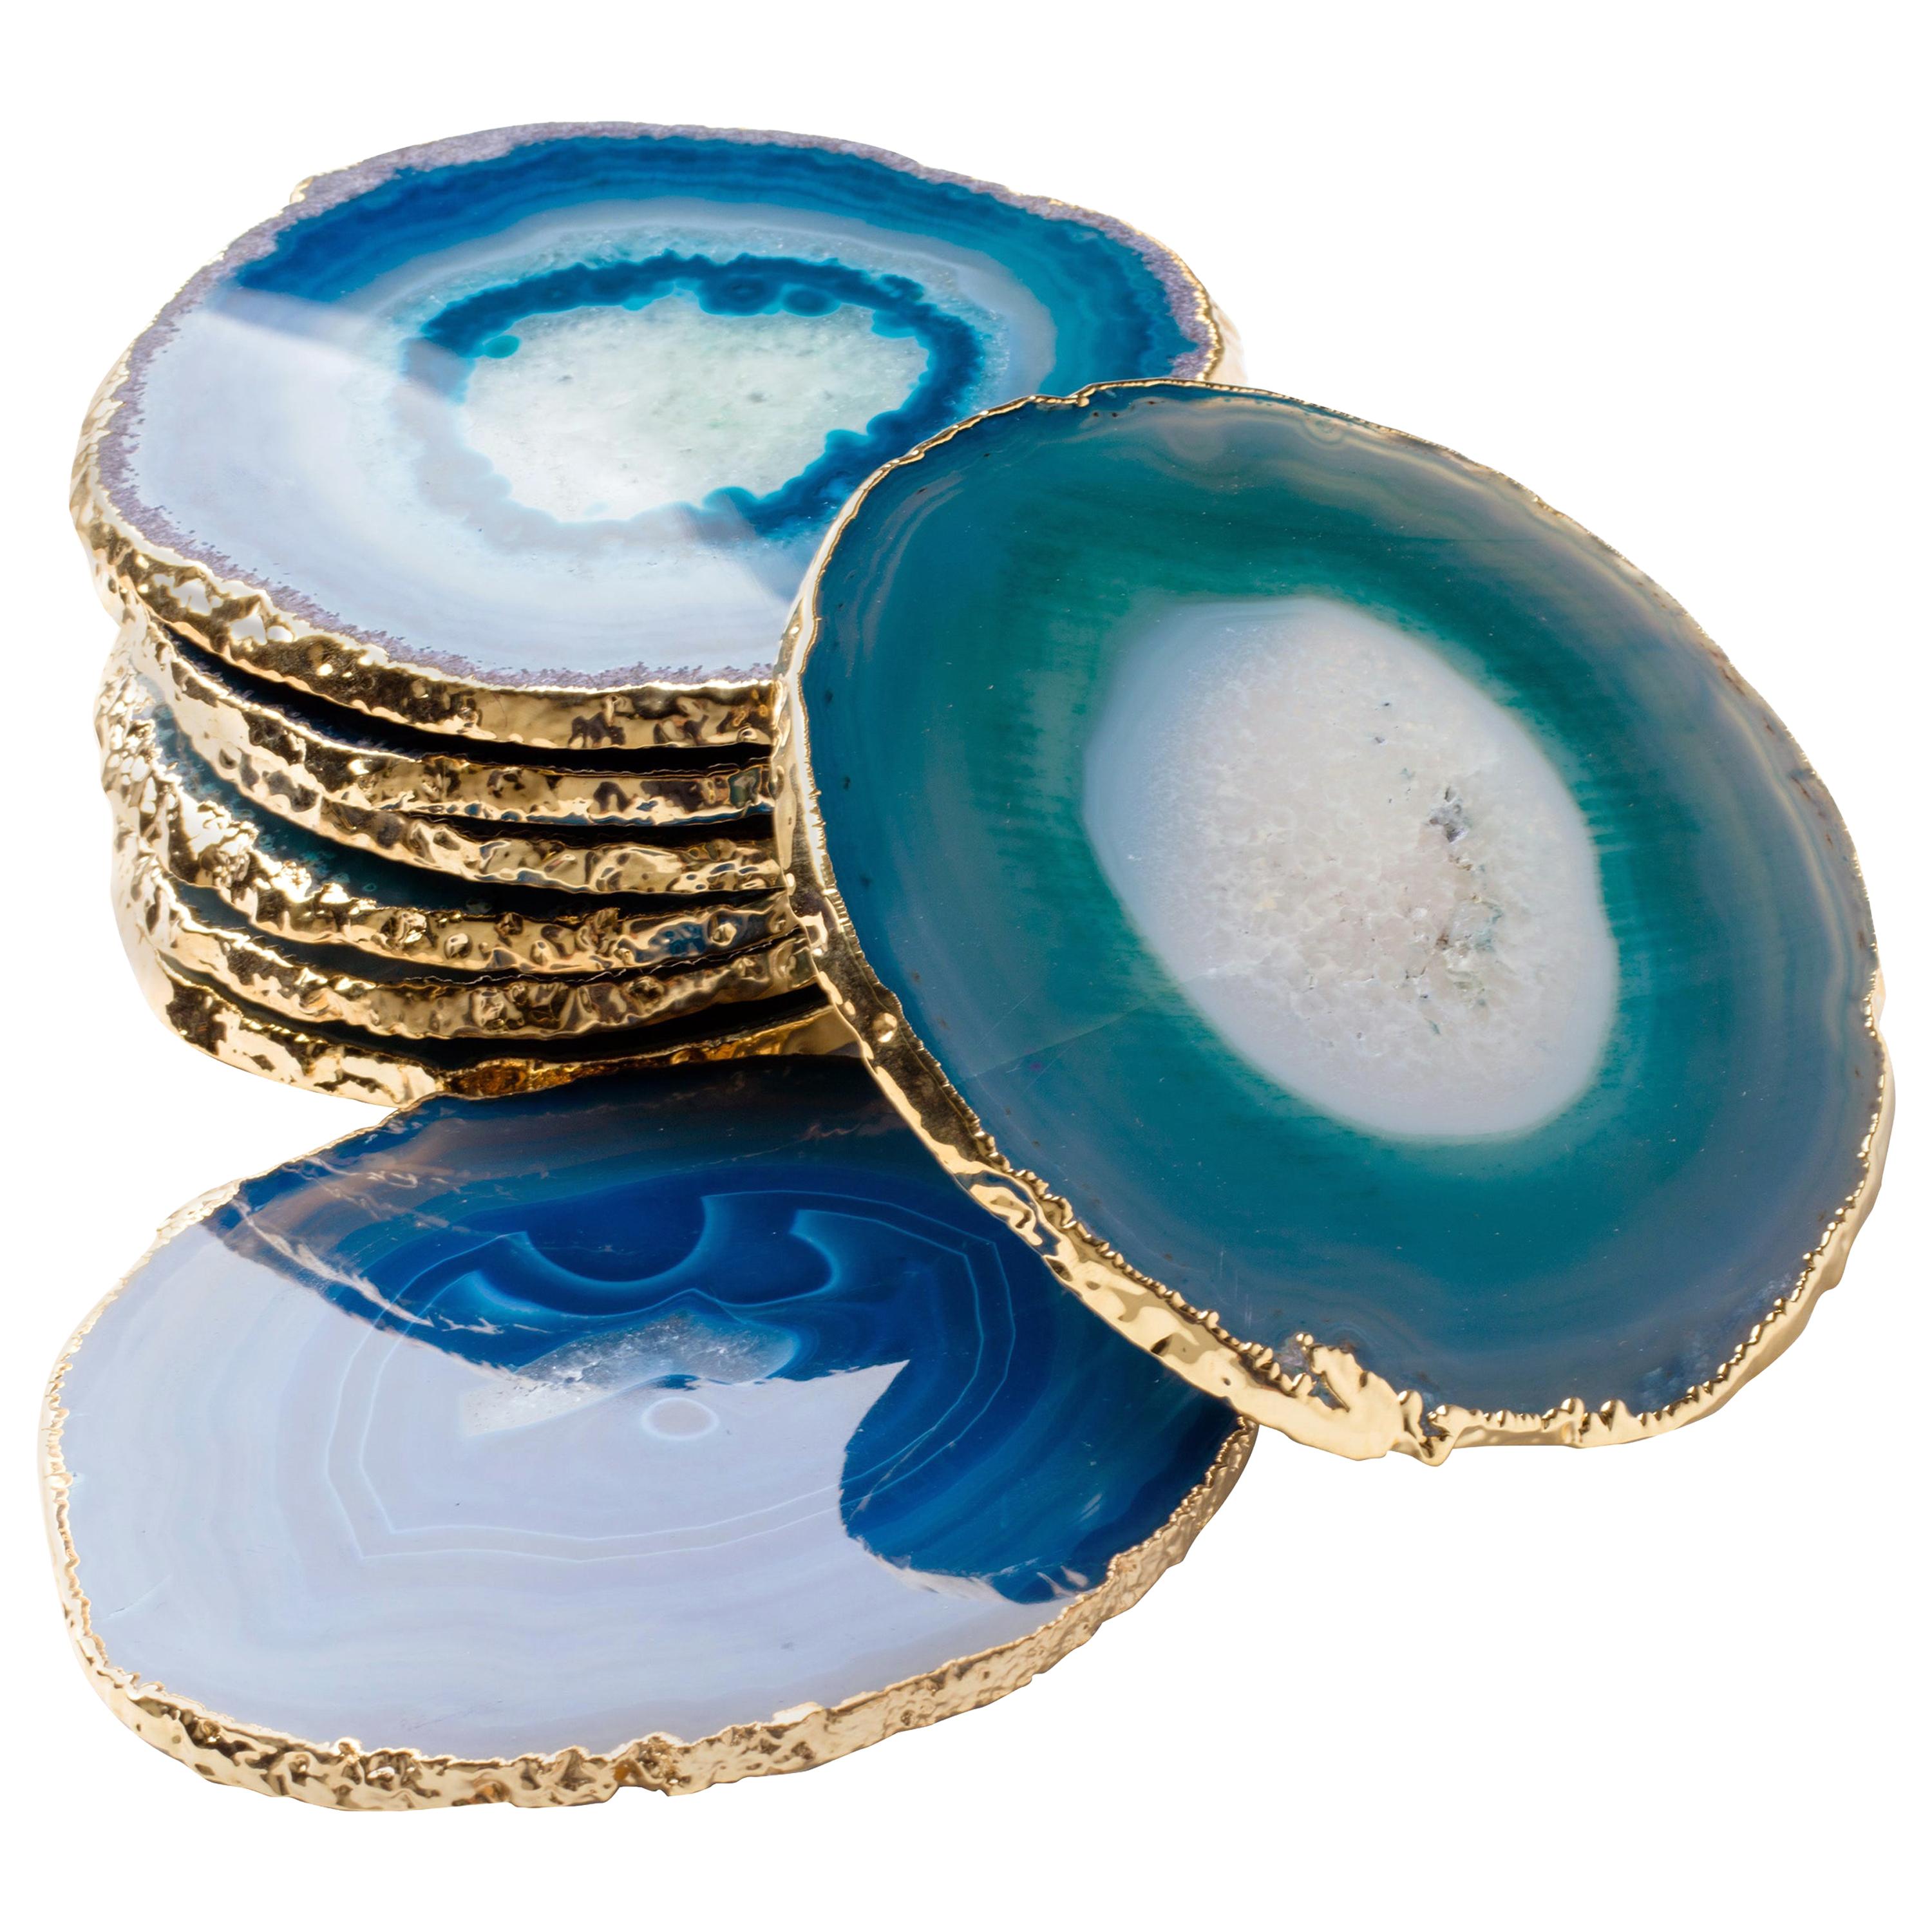 Natural Agate and Crystal Coasters in Teal with 24-Karat Gold Trim, Set/8 For Sale